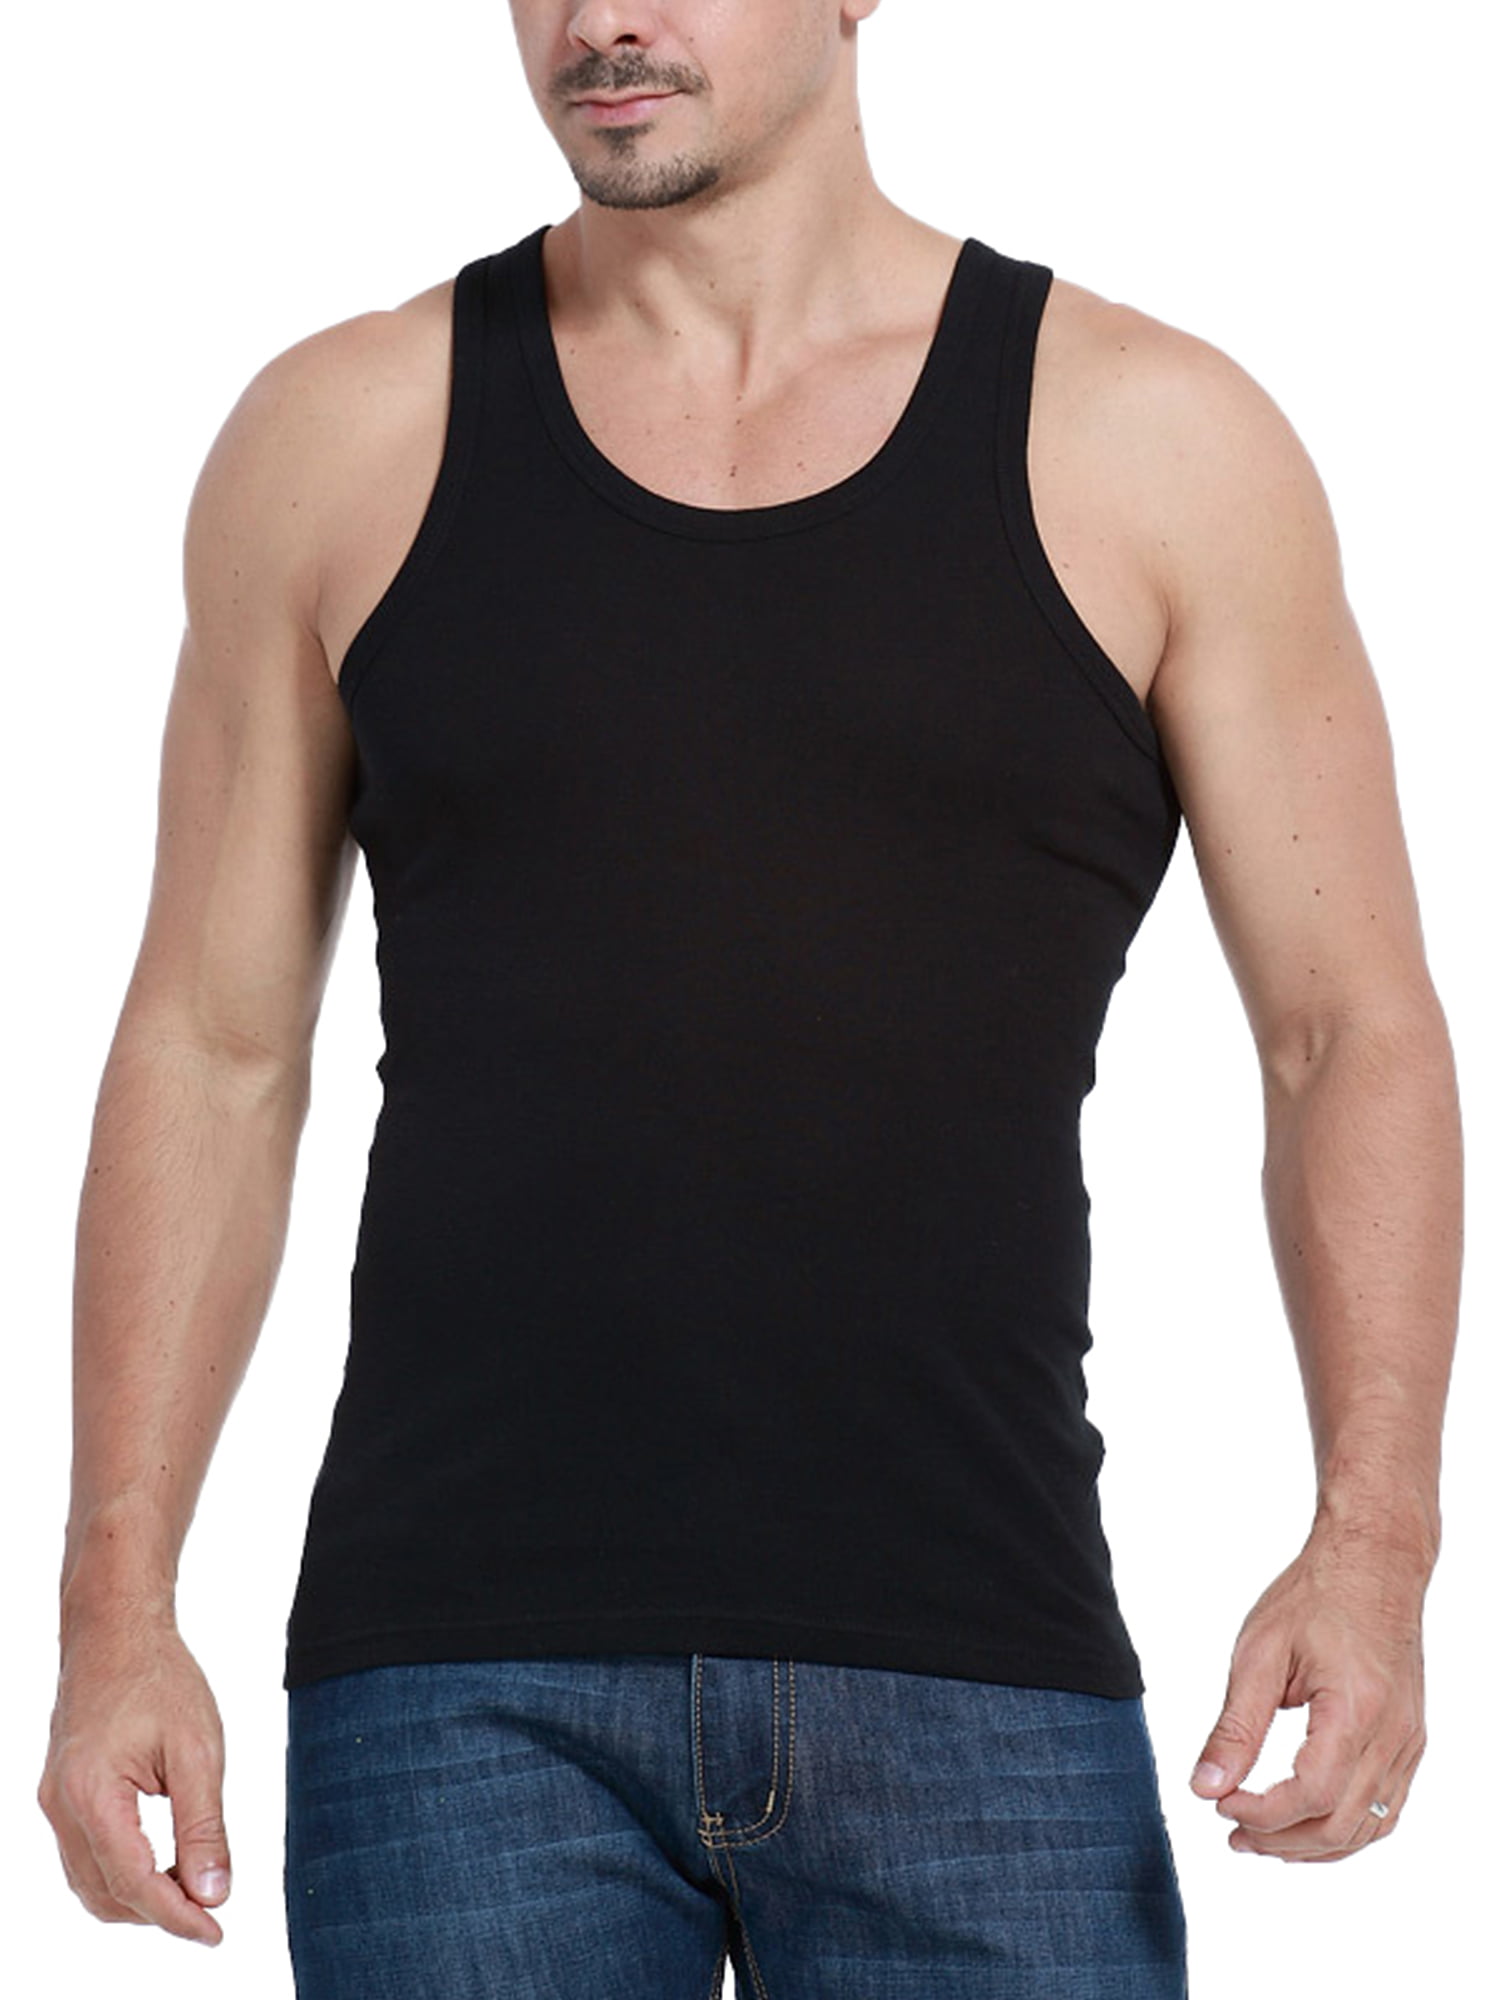 Mens Slim Fit Tank Top Casual V Neck Sleeveless T-Shirt Blouse Sport Athletic Quick Dry Workout Vest Tees 